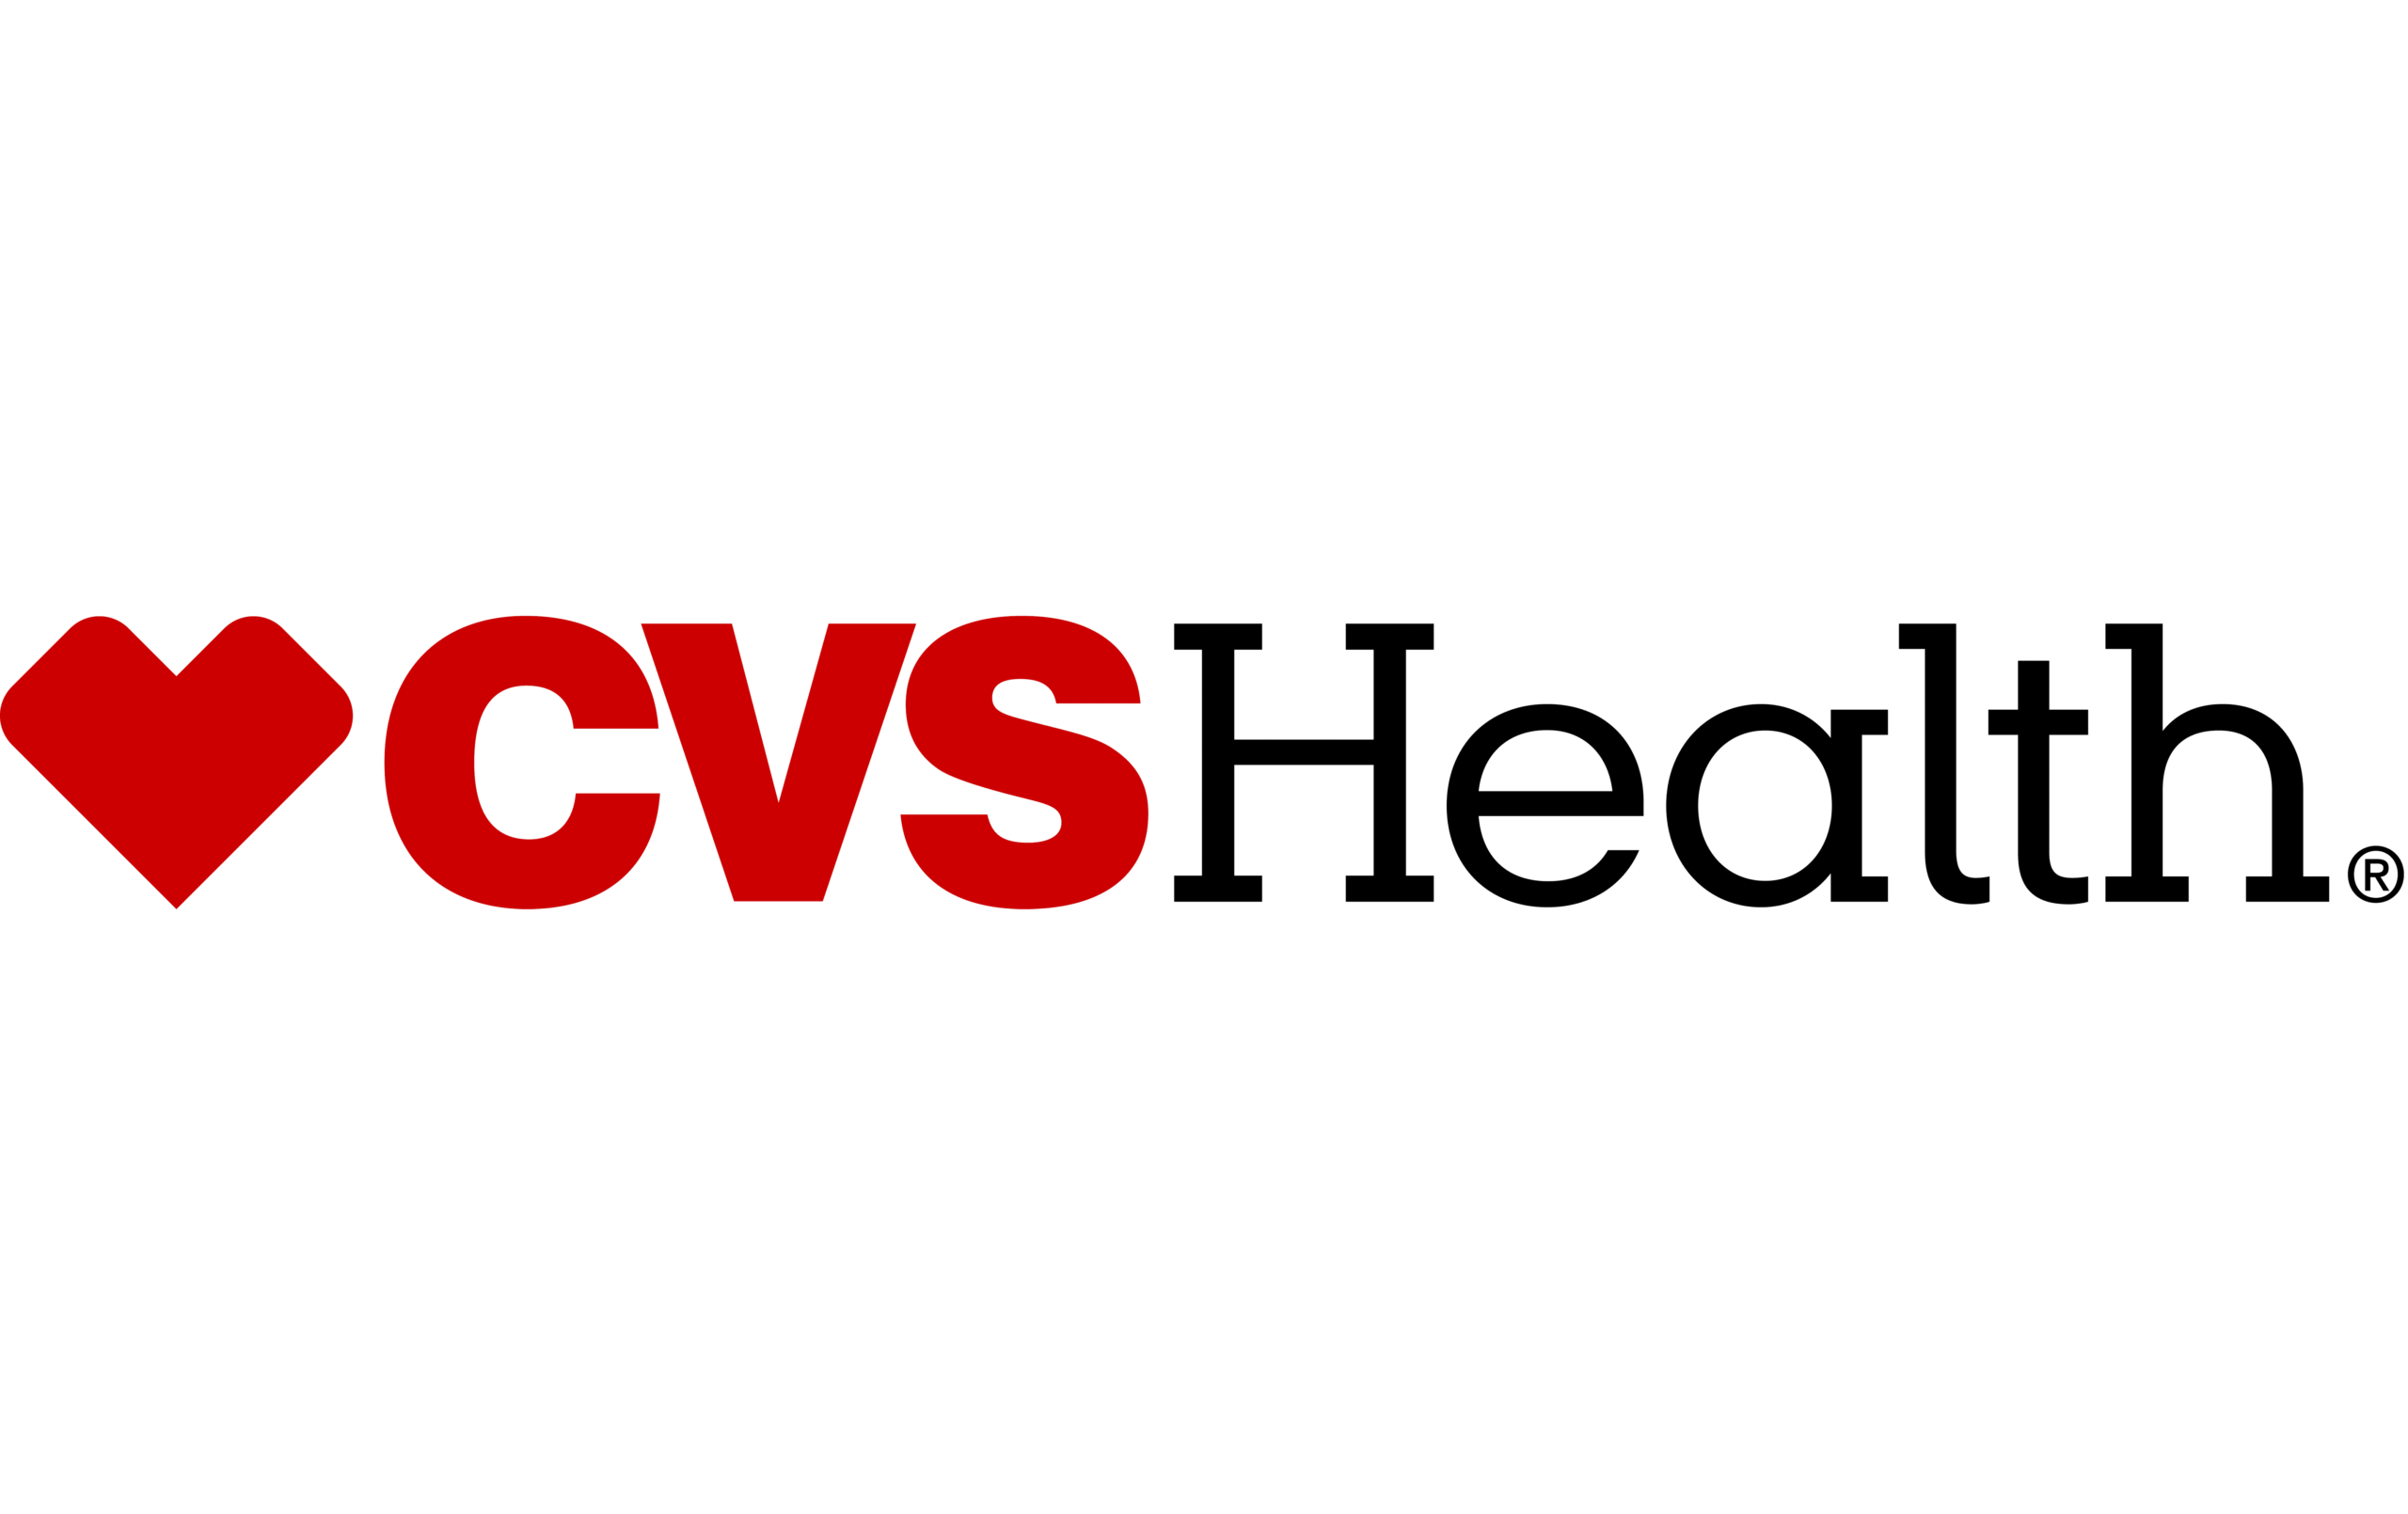 healthcare data collection with CVS